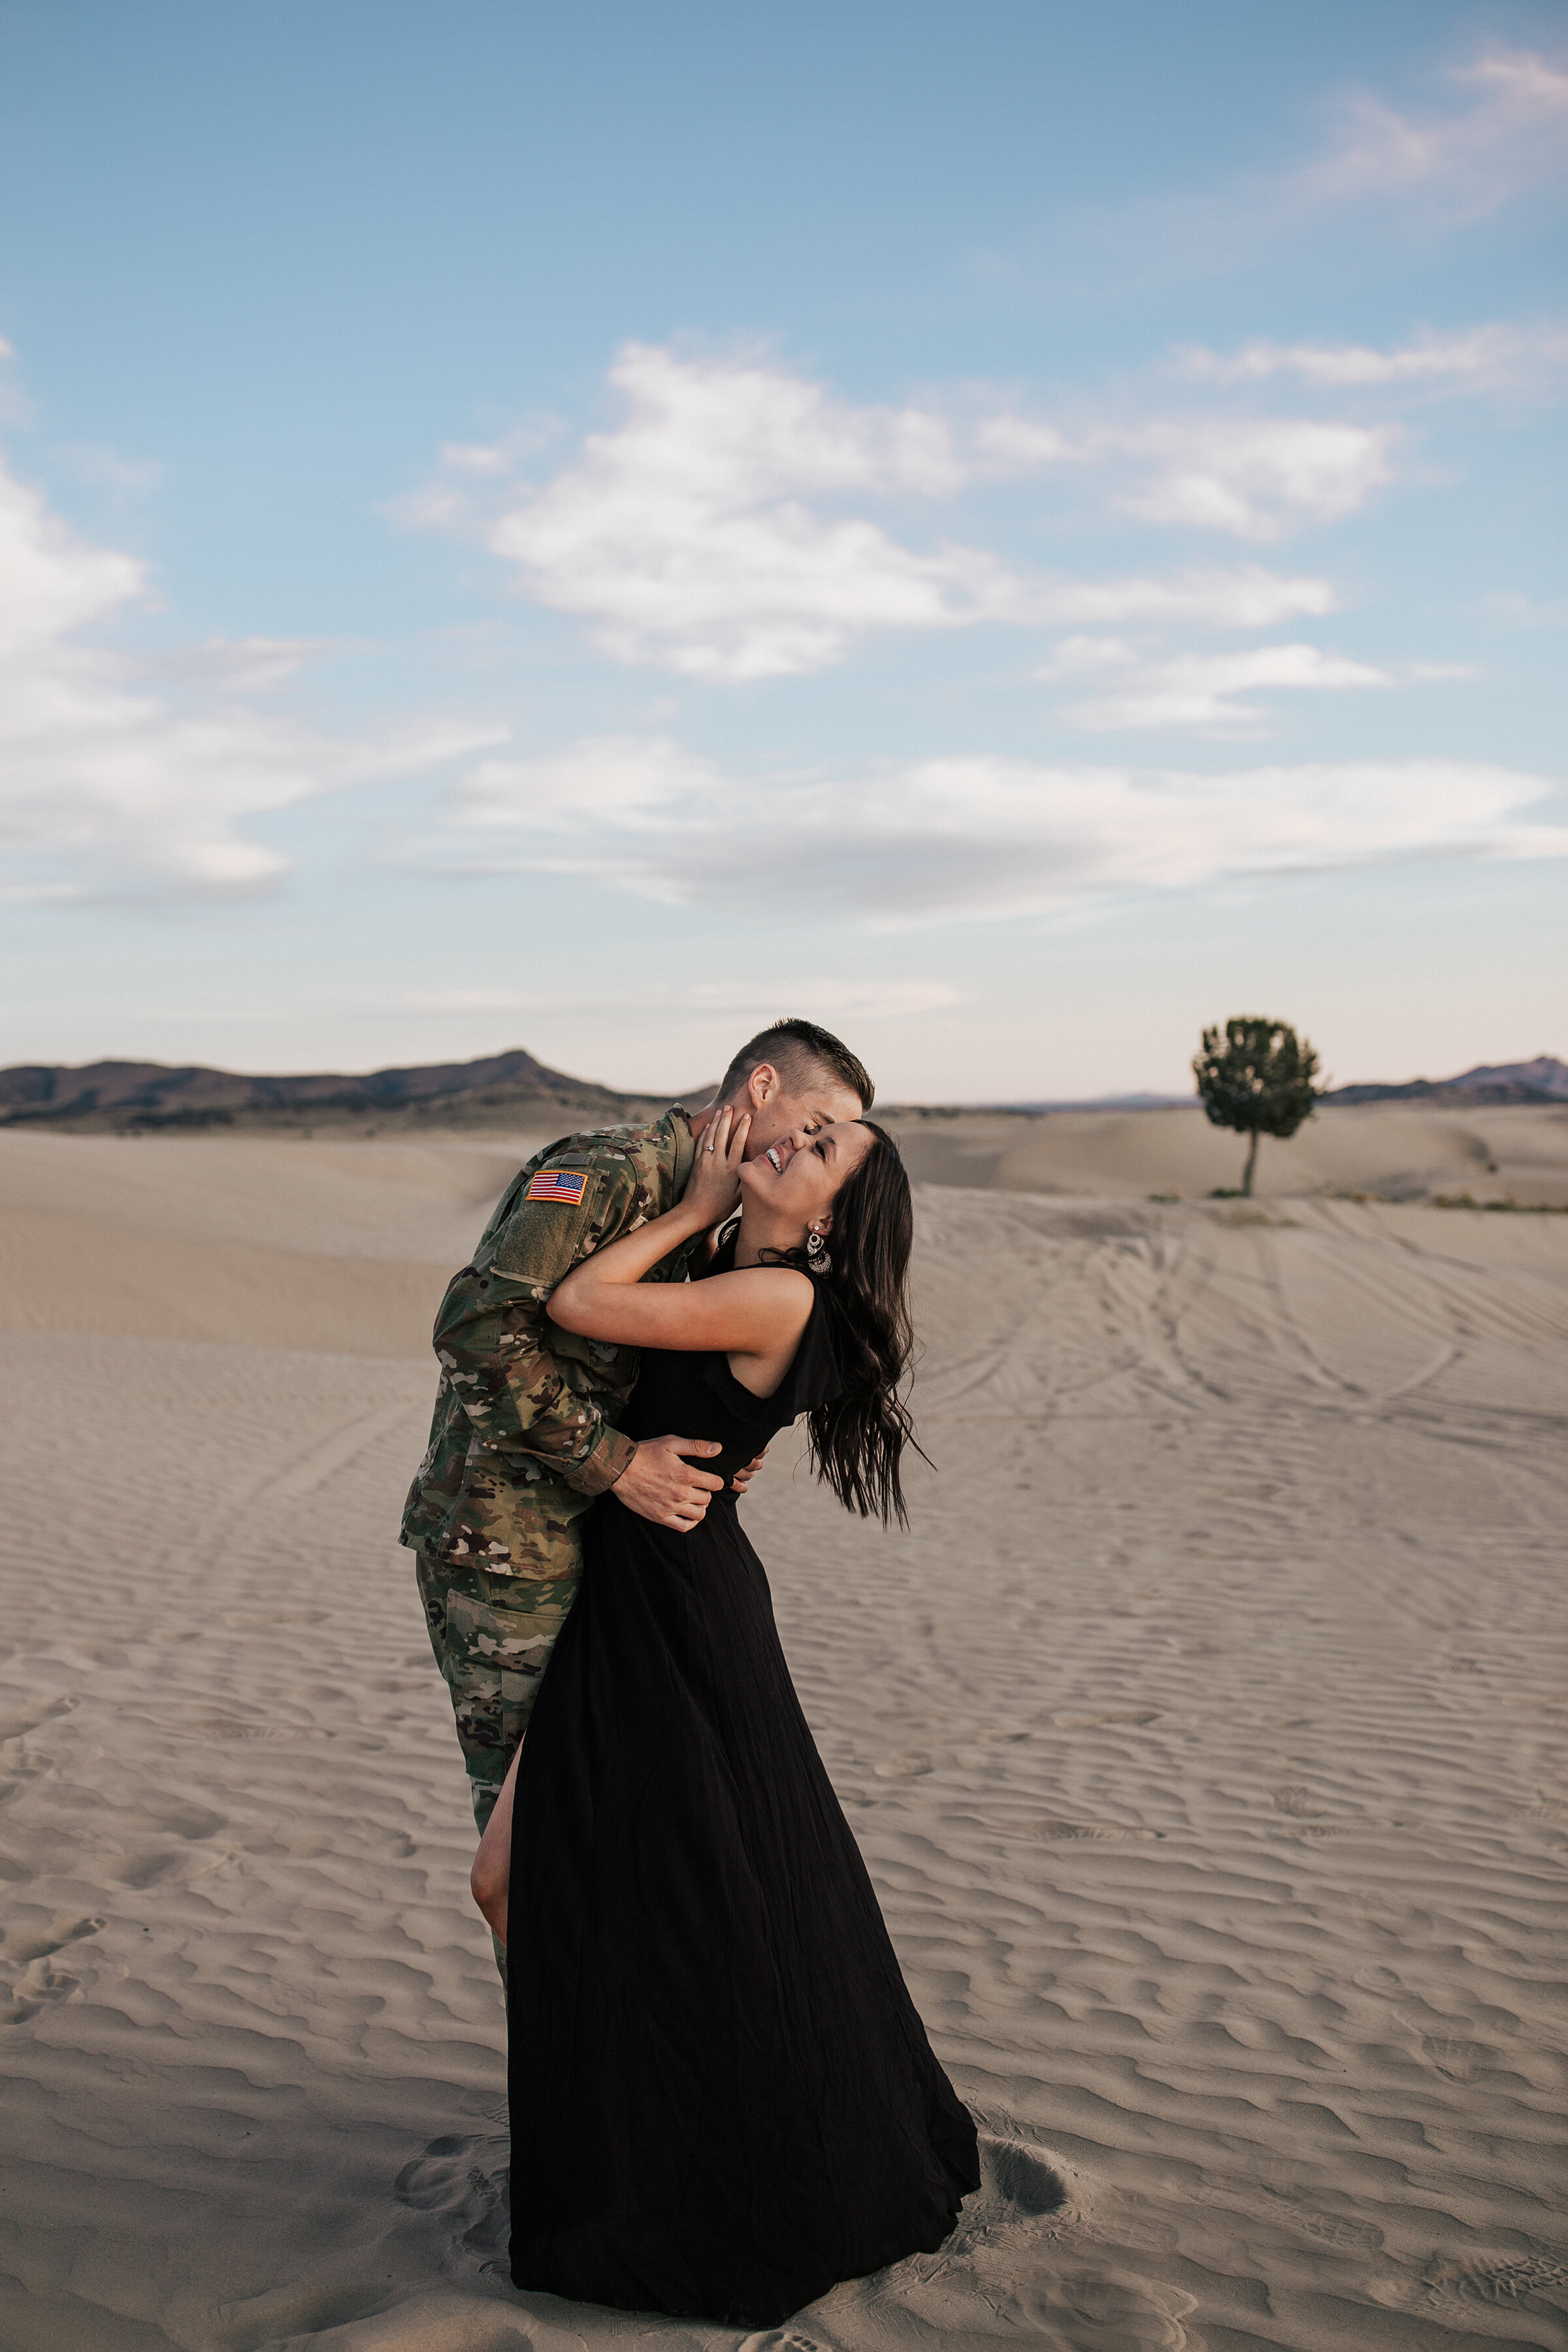  A service man dips and kisses his wife in a dessert in a beautiful and unique honeymoon couples photo shoot. Professional honeymoon photographer Emily Jenkins Photography couple pose inspiration ideas and goals client attire inspiration for military